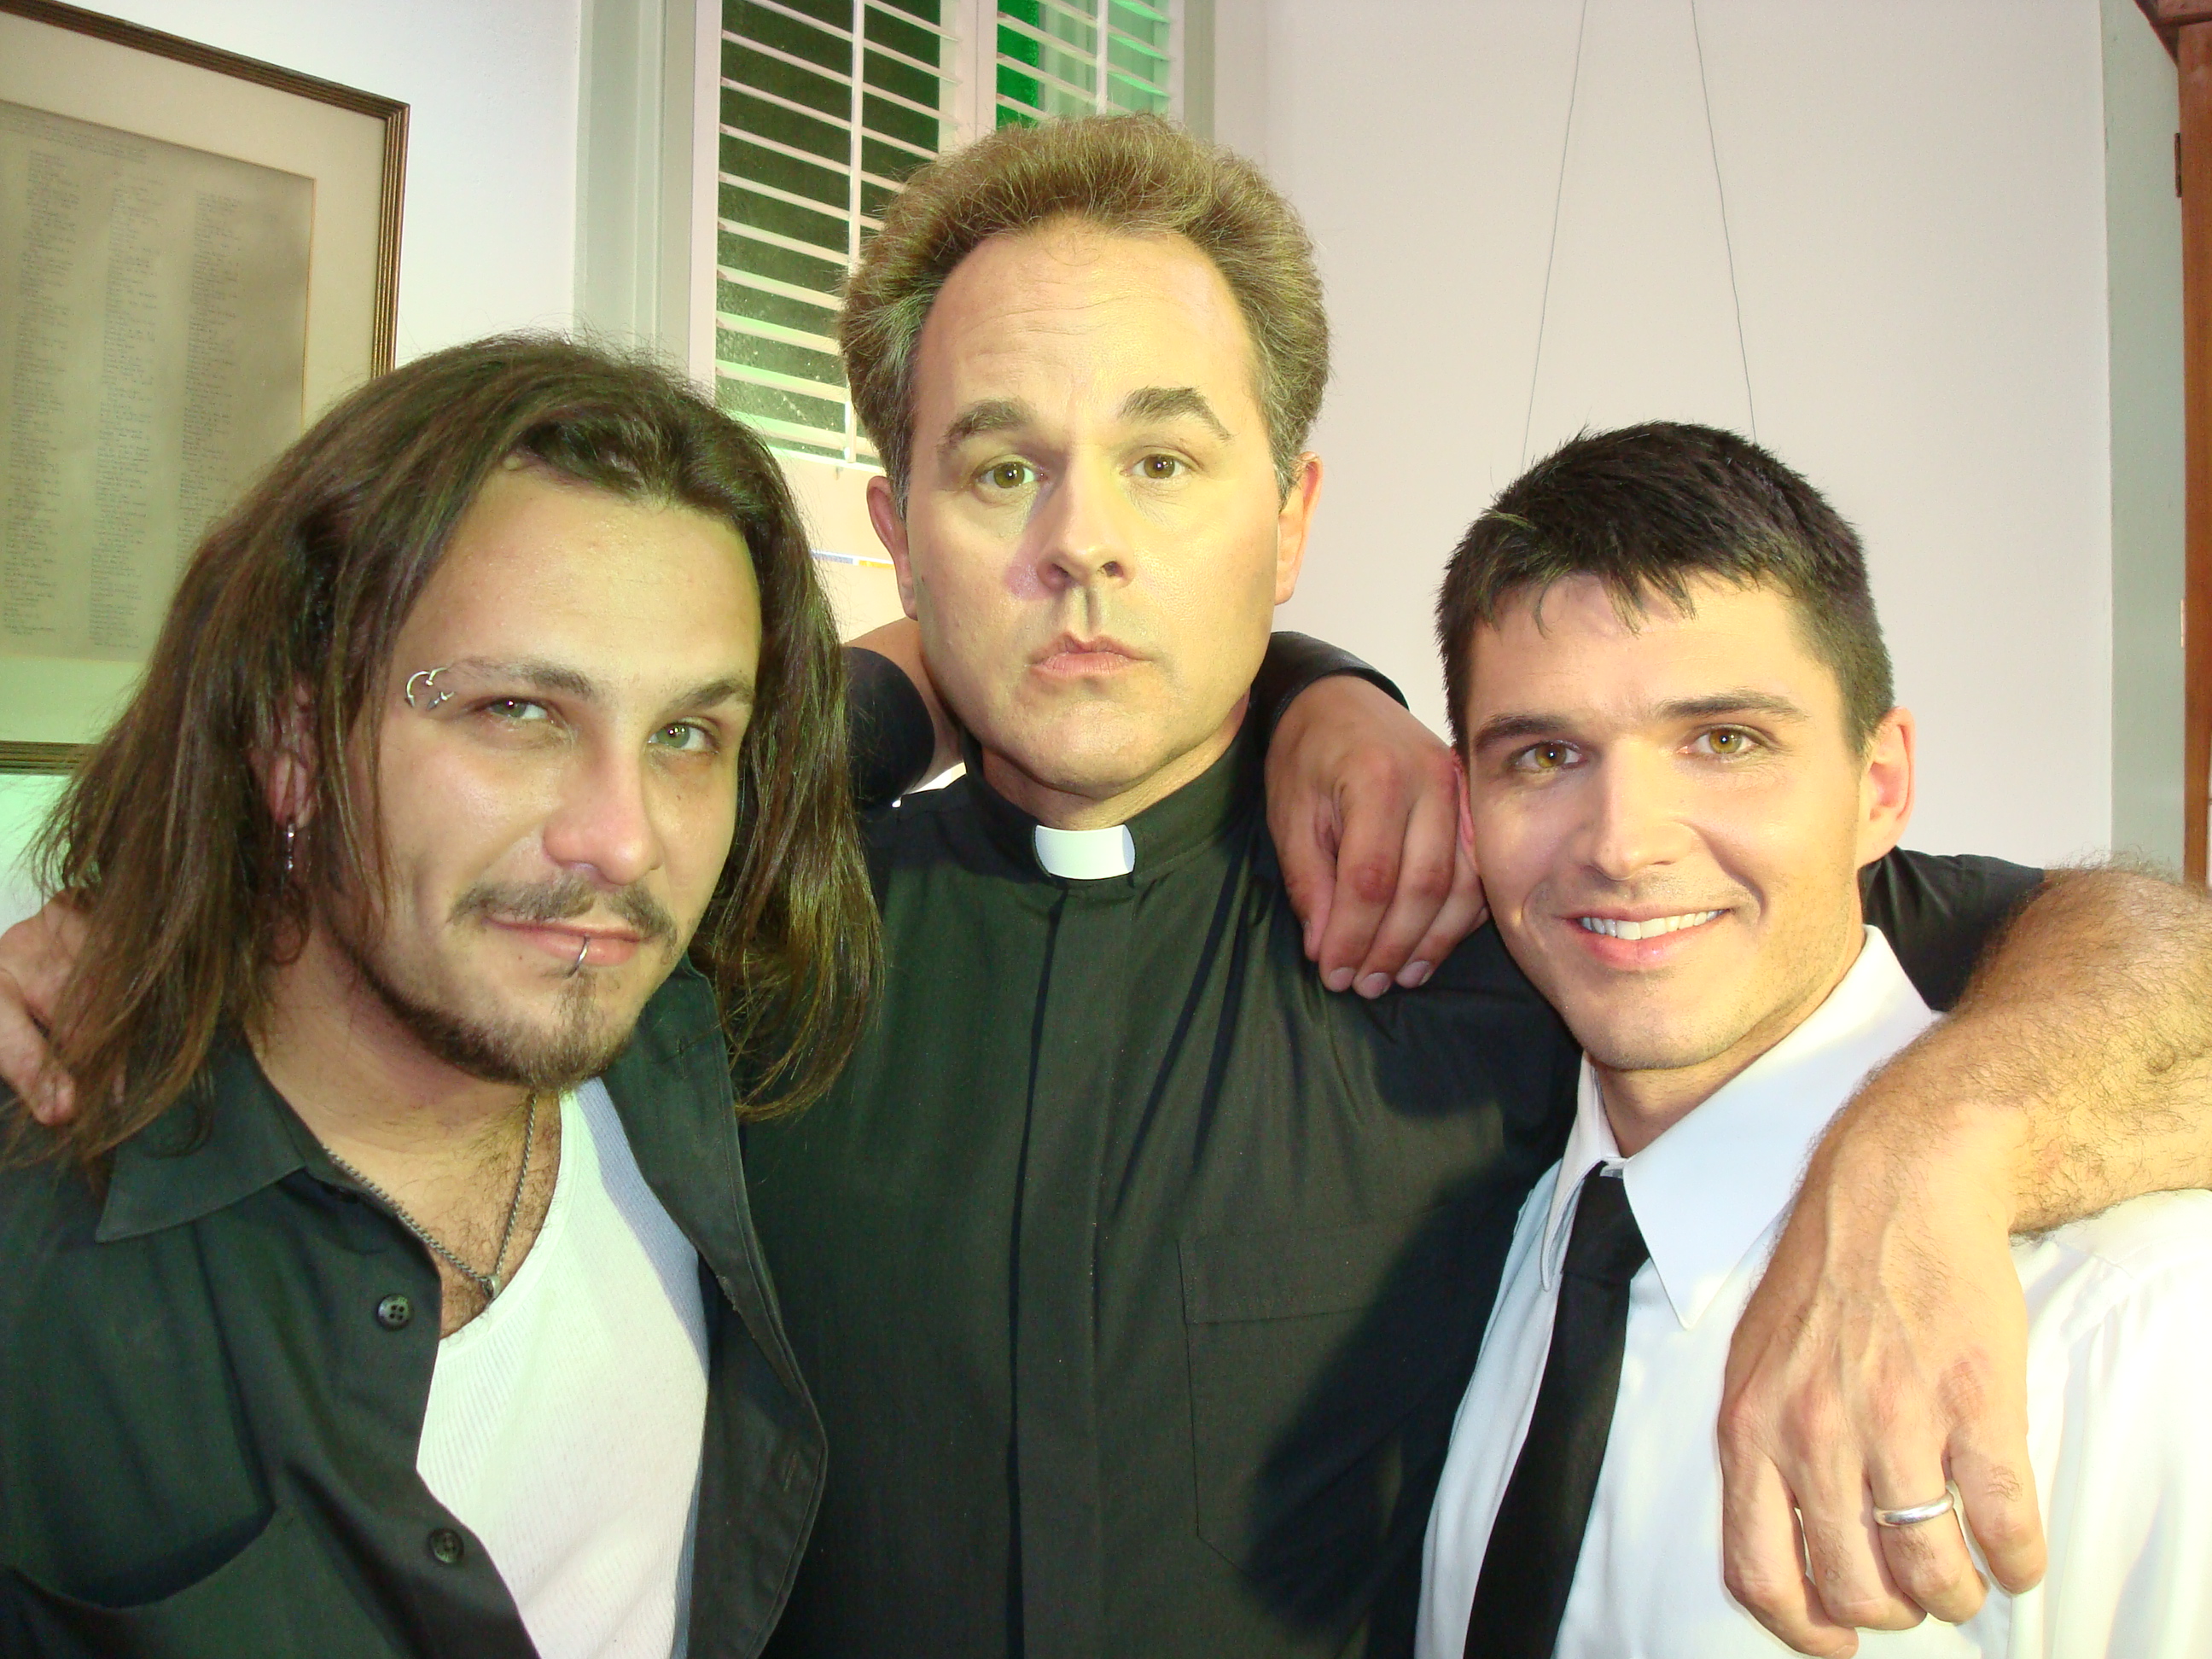 Ike Duncan, Chris Kinkade and Russell Quinn from the set of 